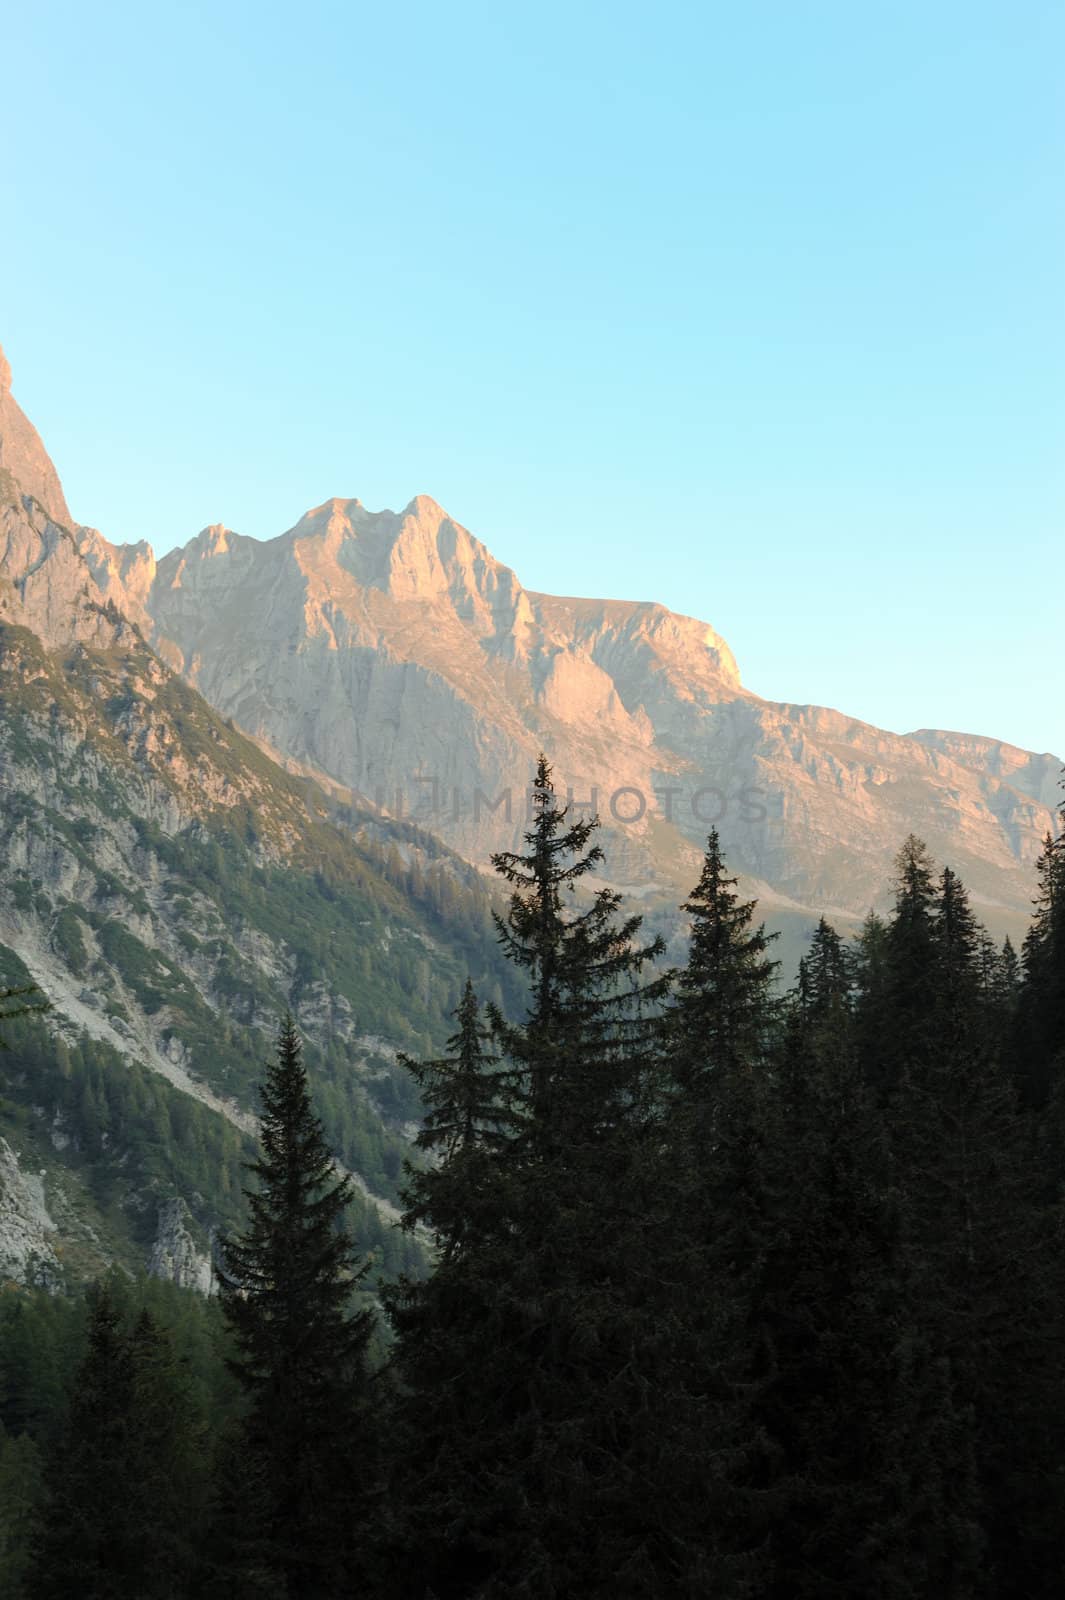 An image of evening mountains and fir-trees